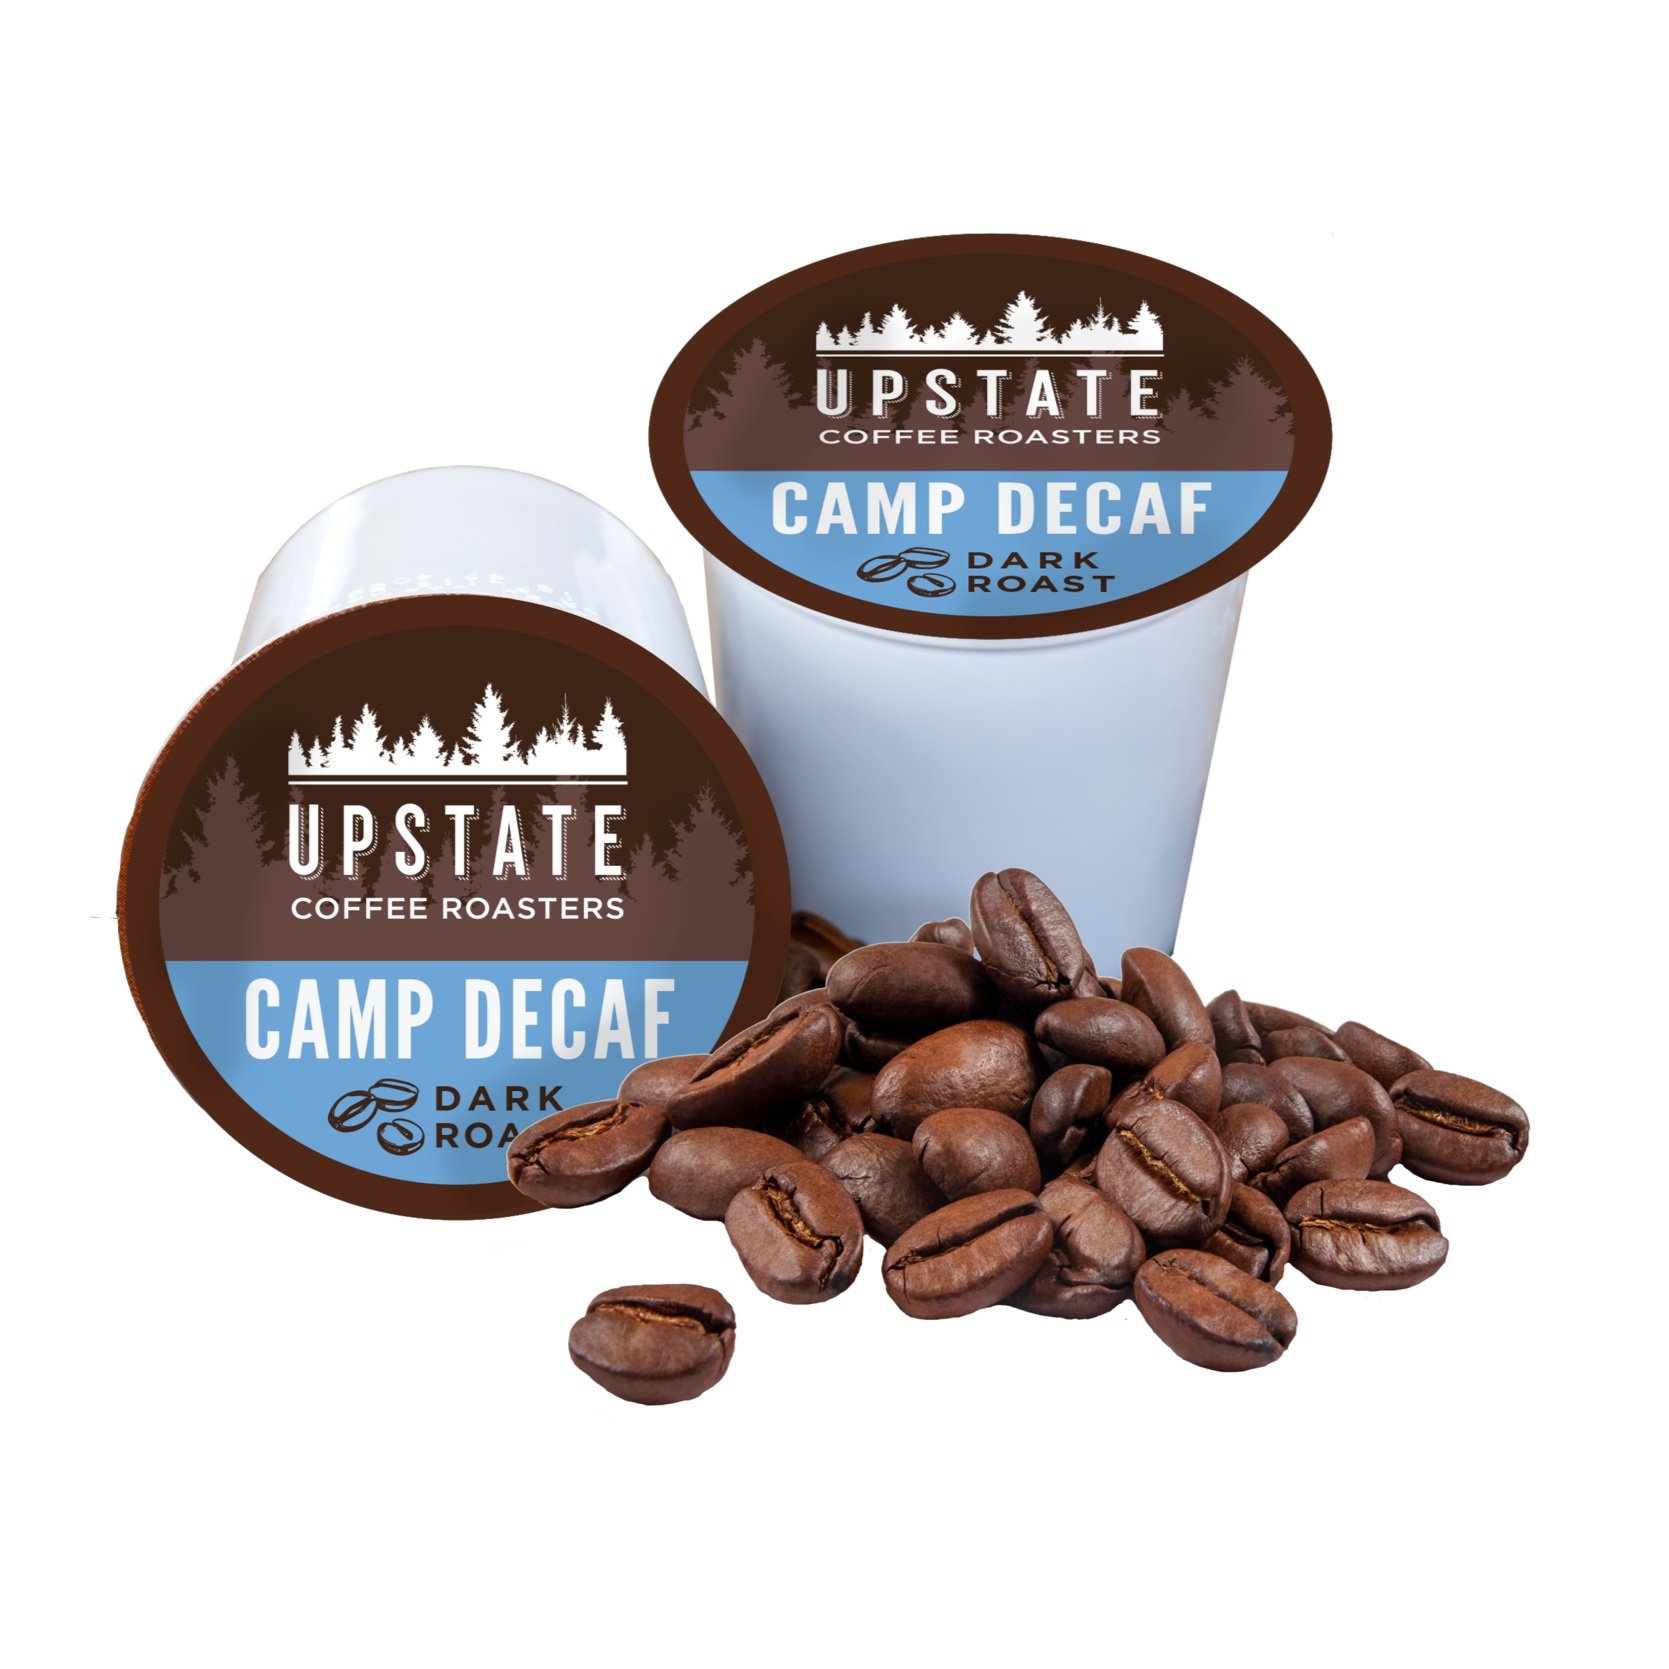 Kcup+Pod+and+coffee+Decaf+mock-up_Updated.jpg